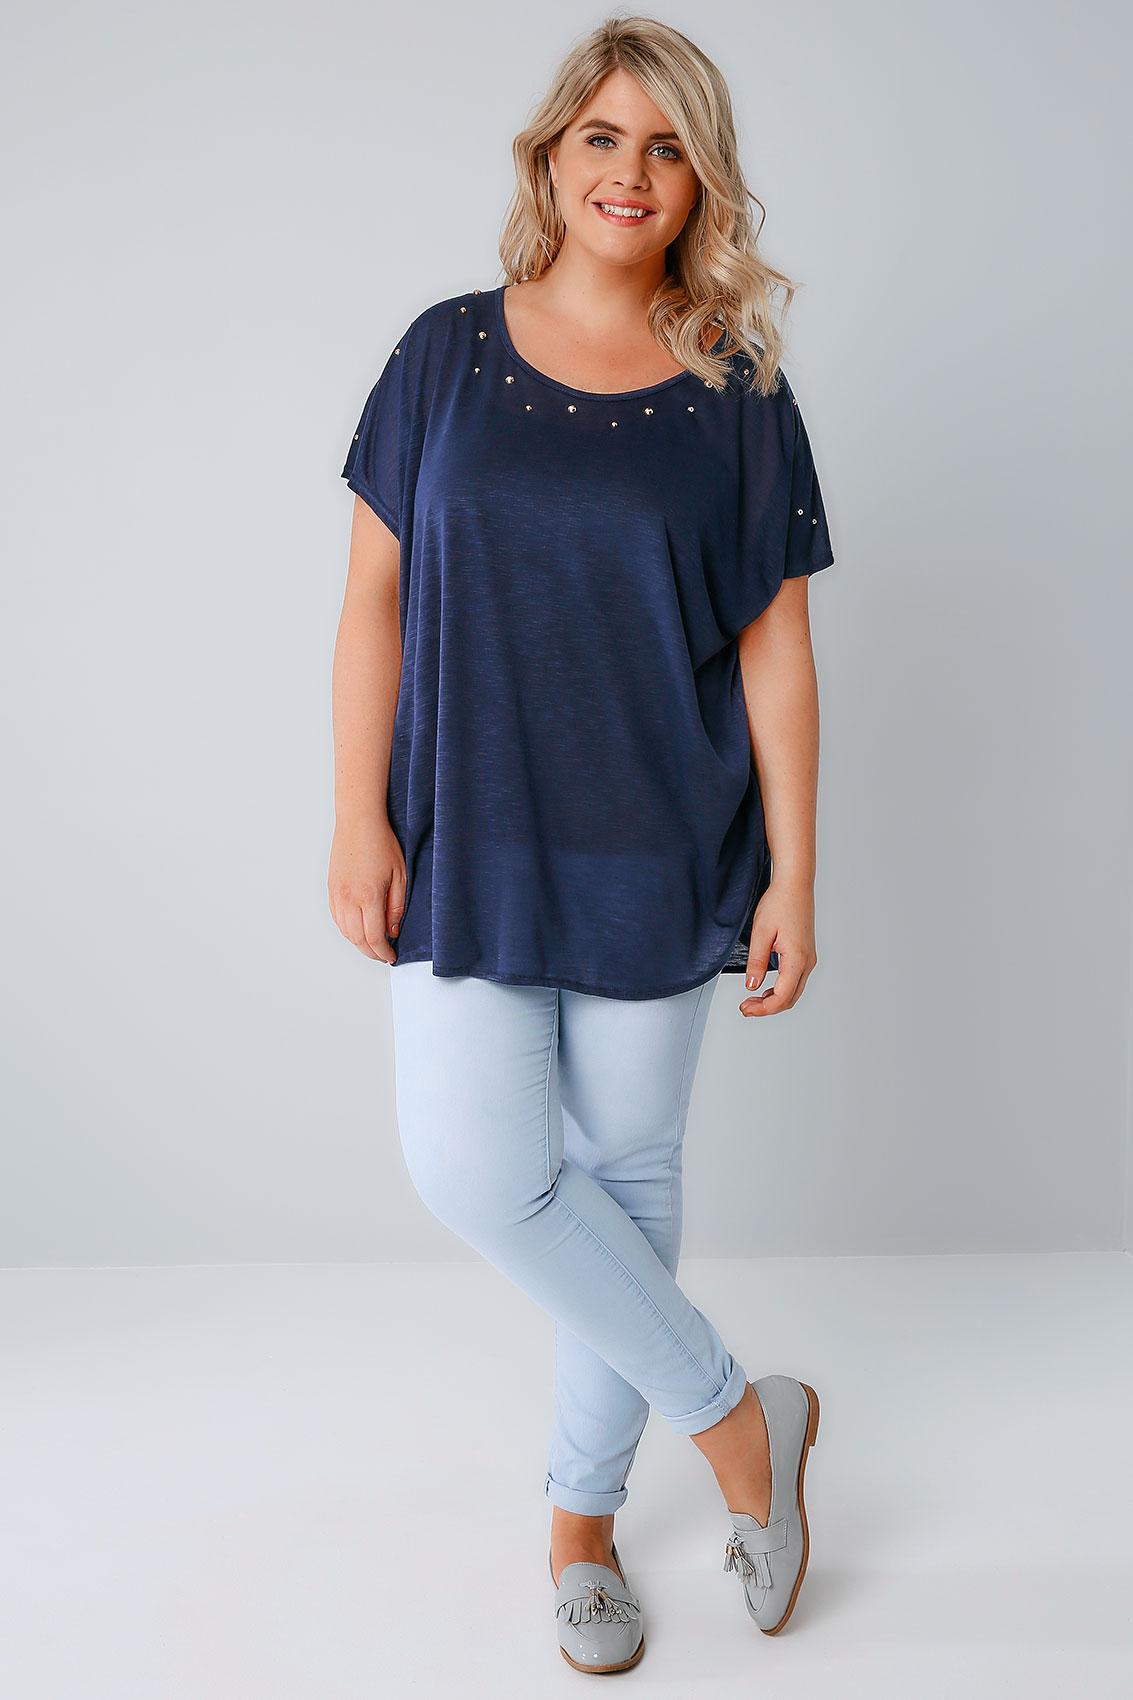 BLUE VANILLA CURVE Navy Top With Studded Neckline & Zip Back, Plus size ...